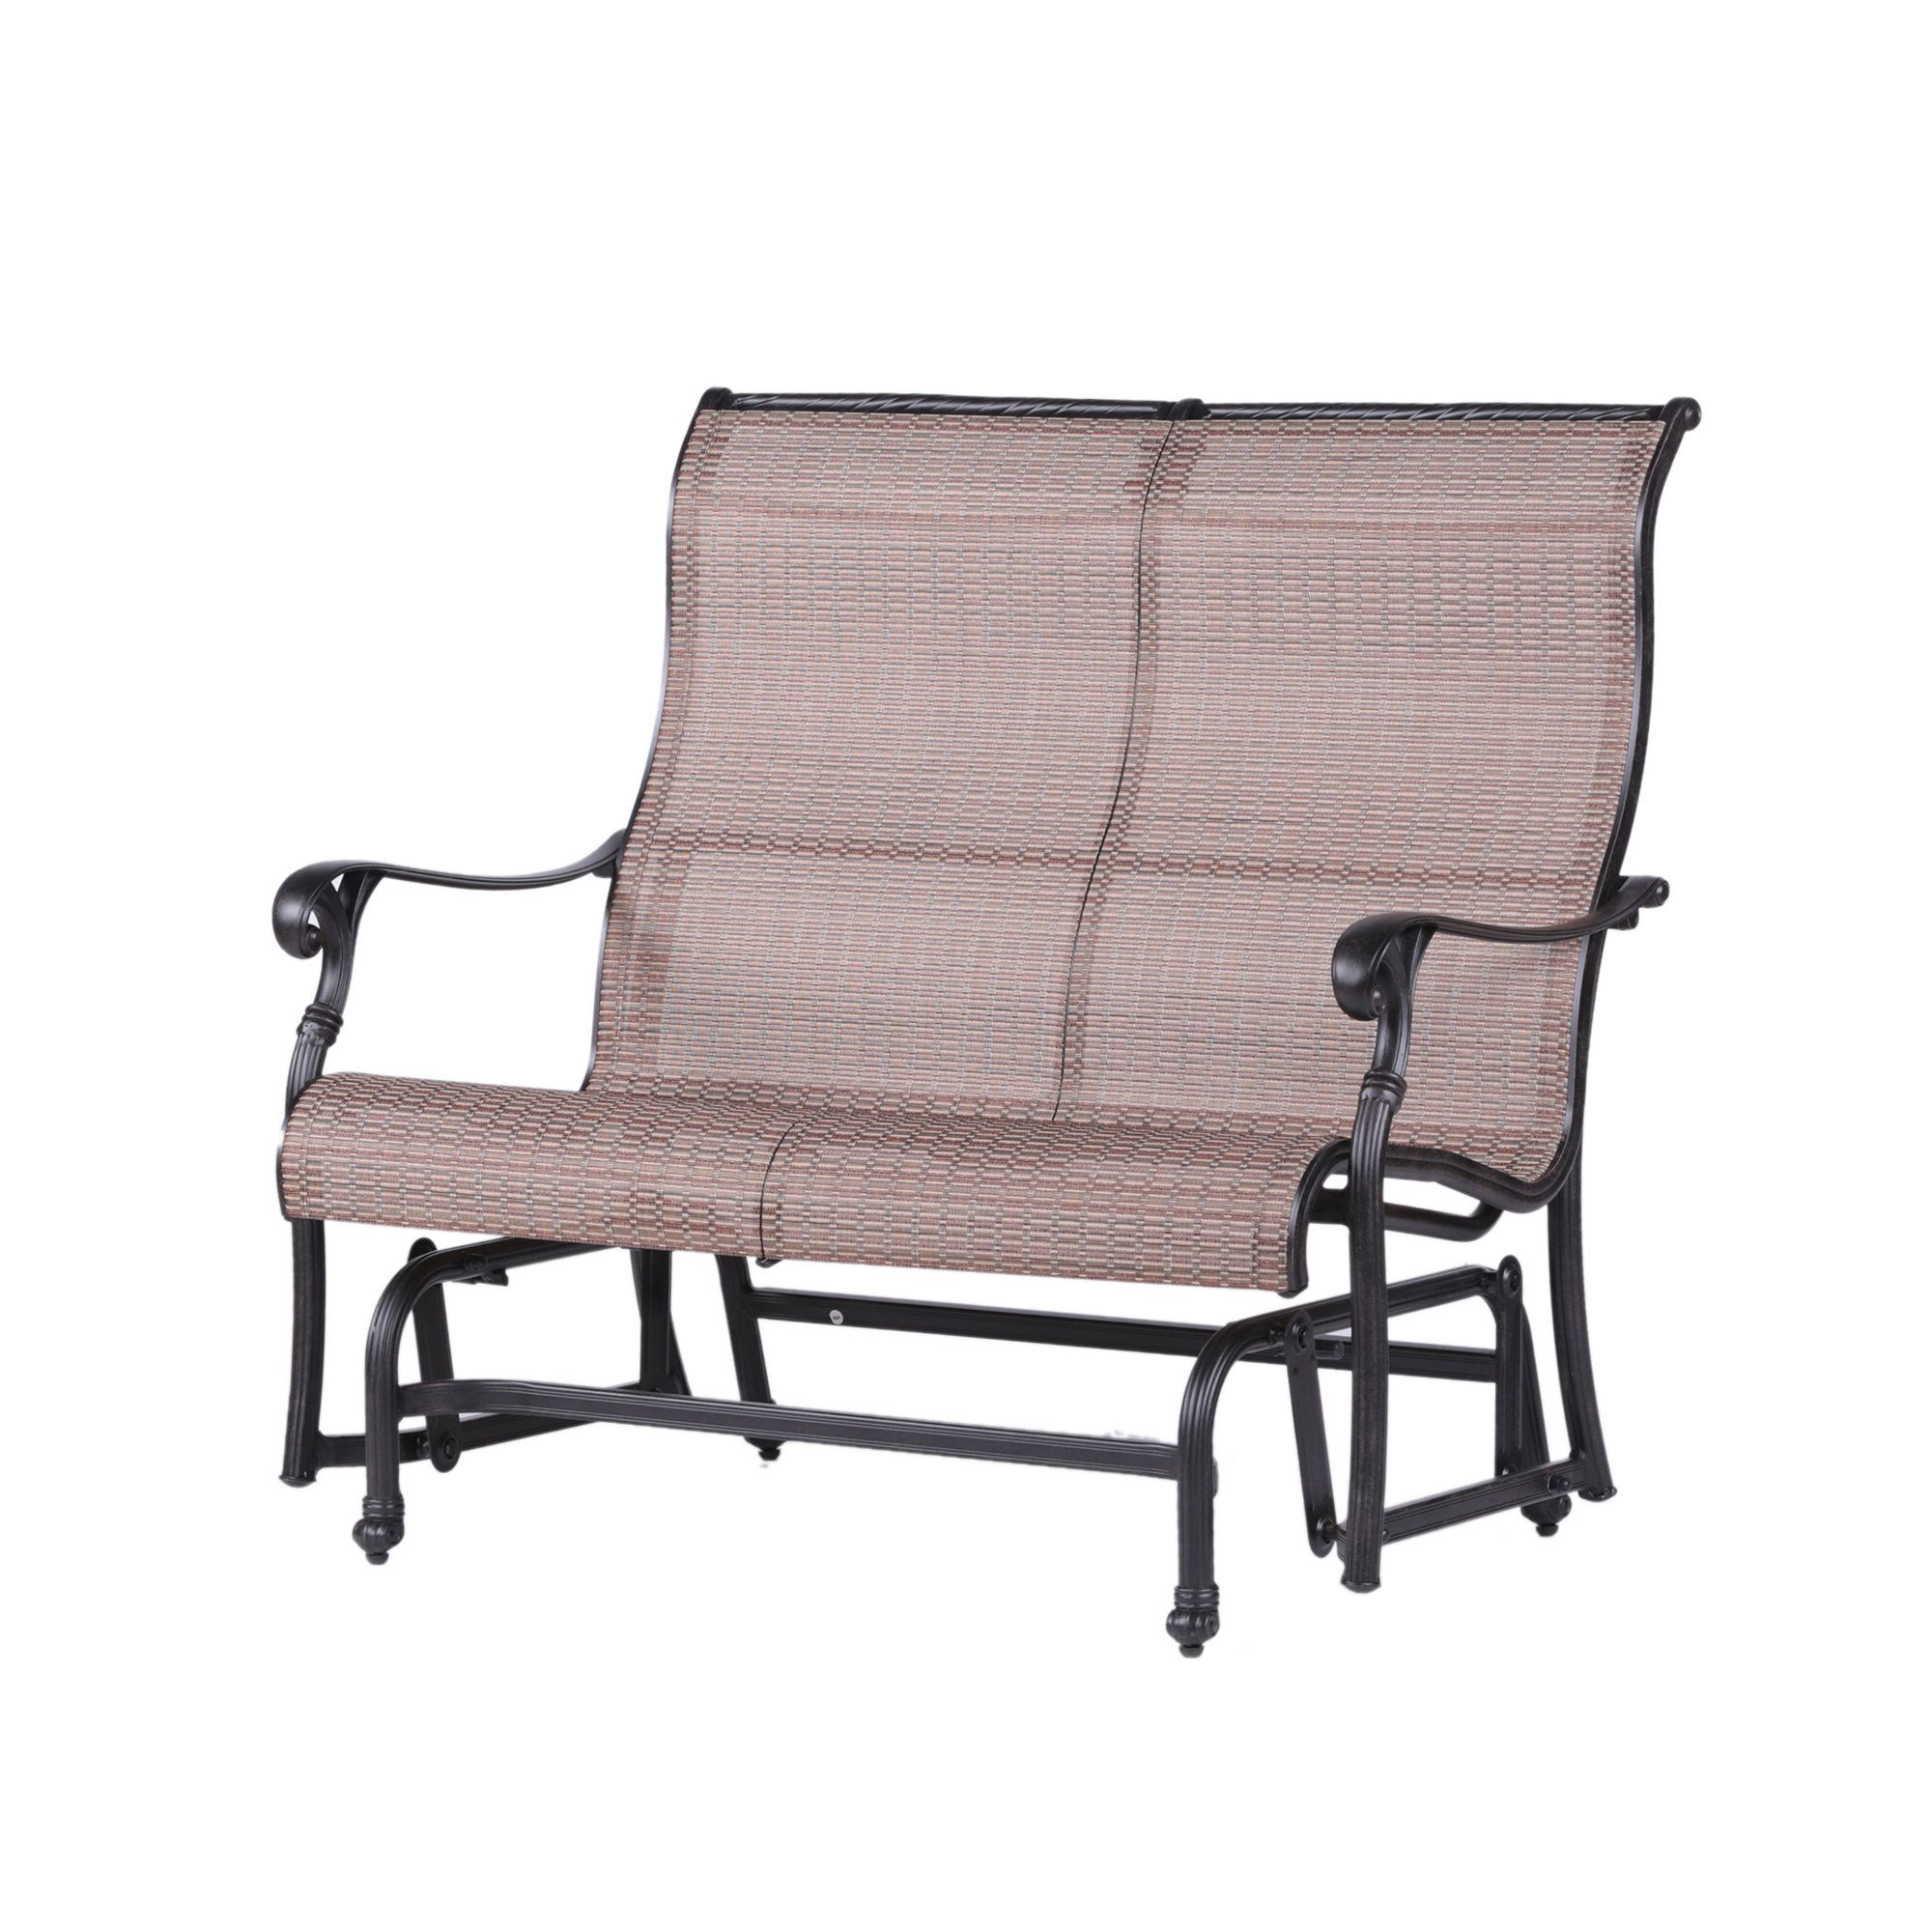 Germano Double Glider Bench With Cushion With Regard To Well Known Glider Benches With Cushion (View 27 of 30)